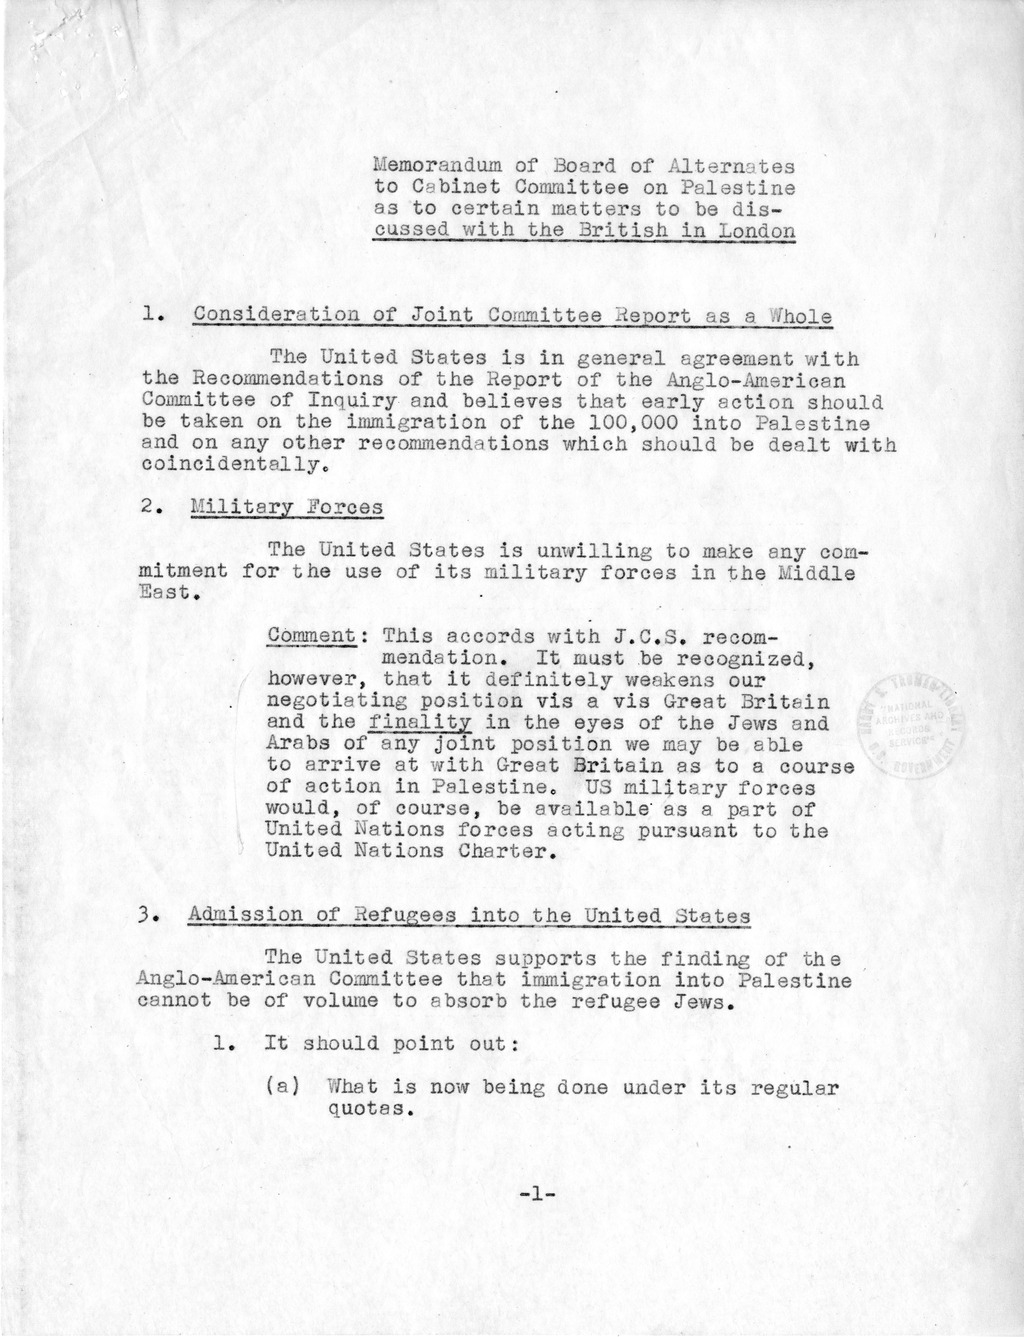 Memorandum of Instructions to the Committee Discussing Palestine - London Conference